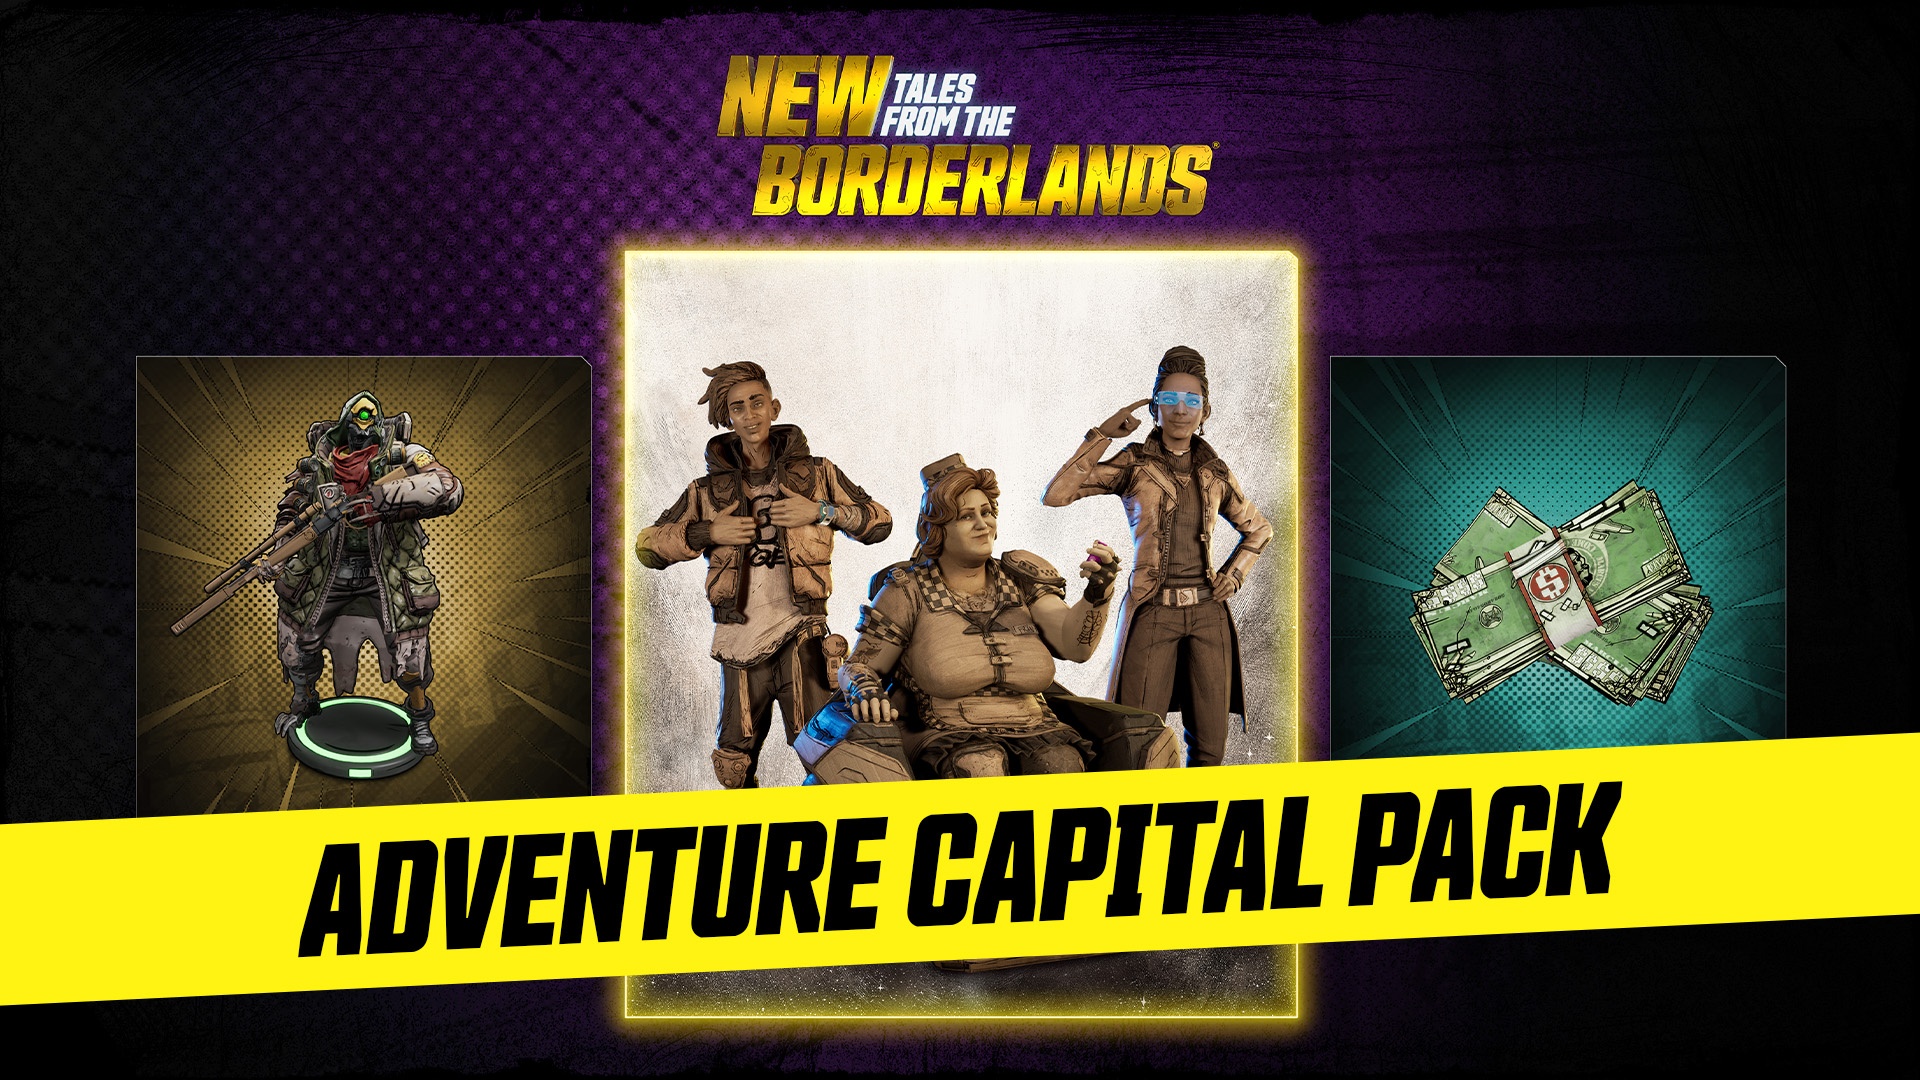 New Tales From the Borderlands Inline Asset